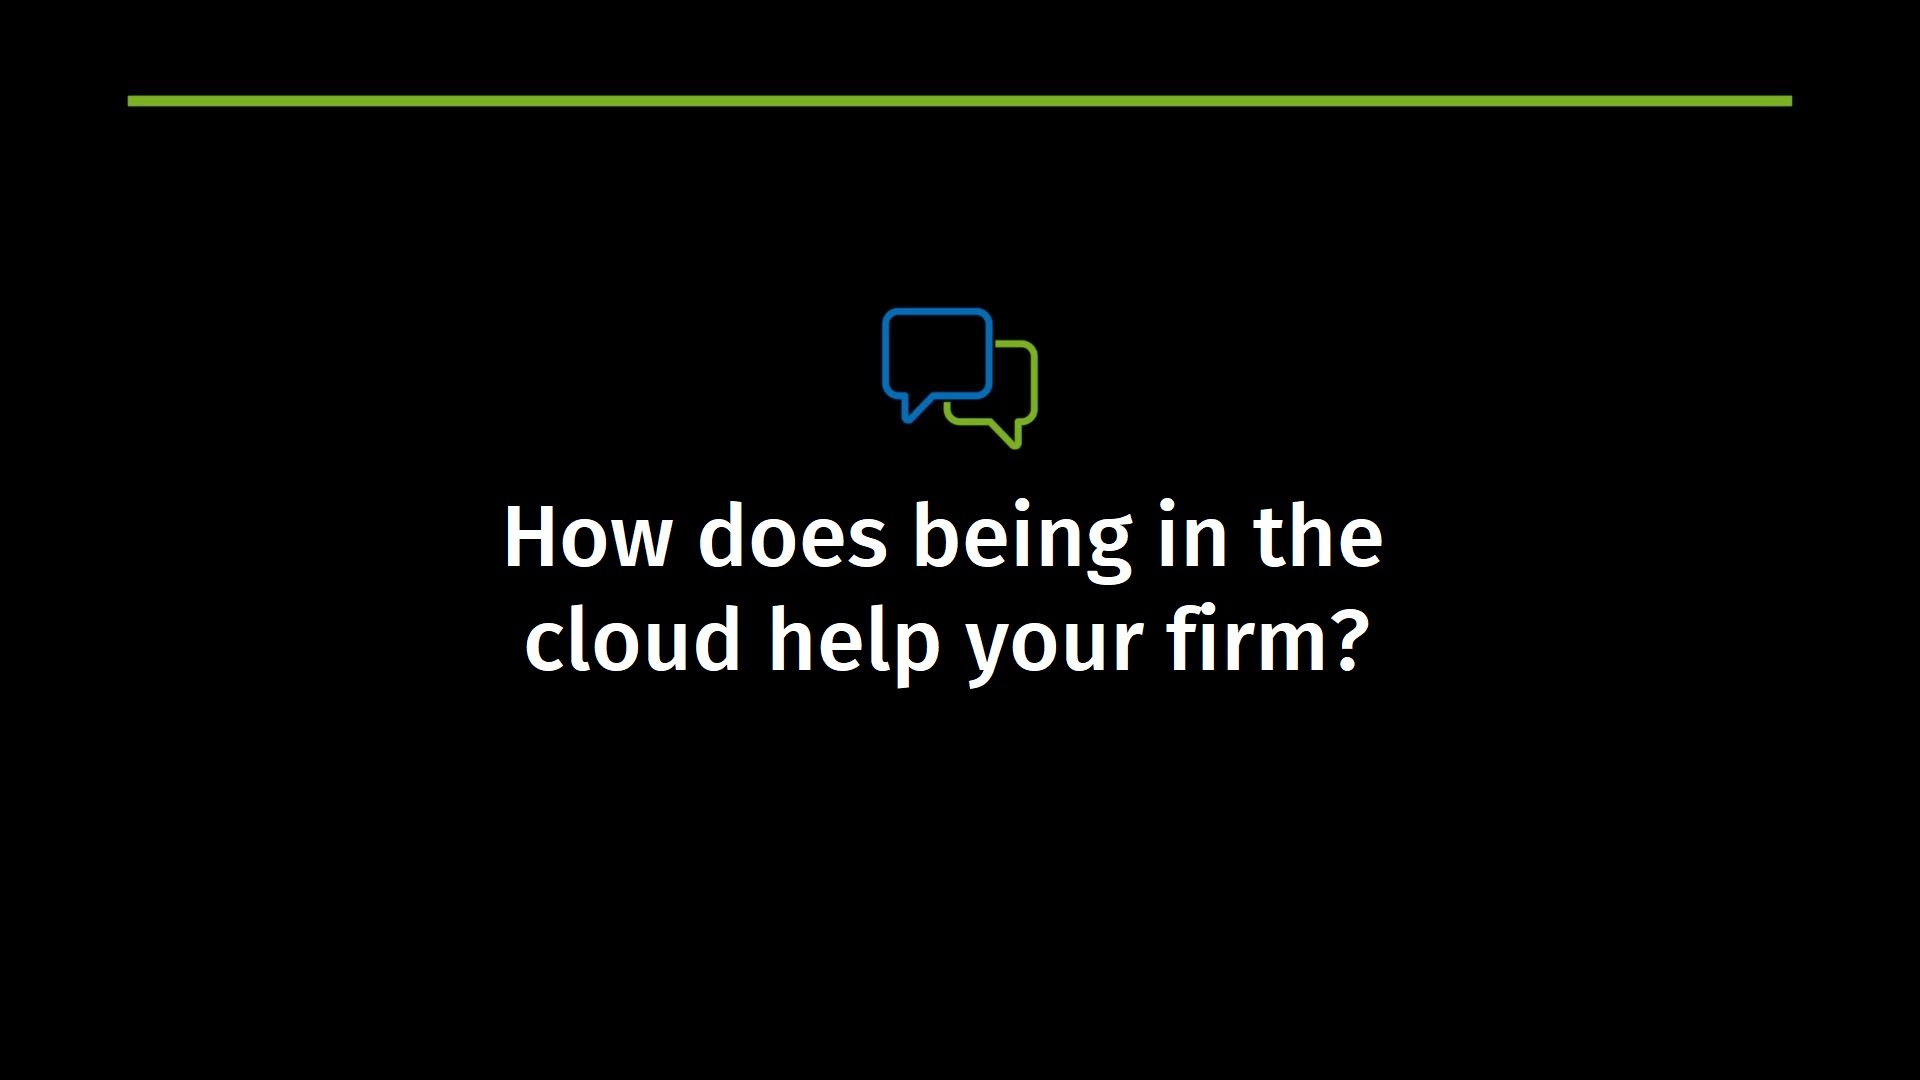 How does being in the cloud help your firm?